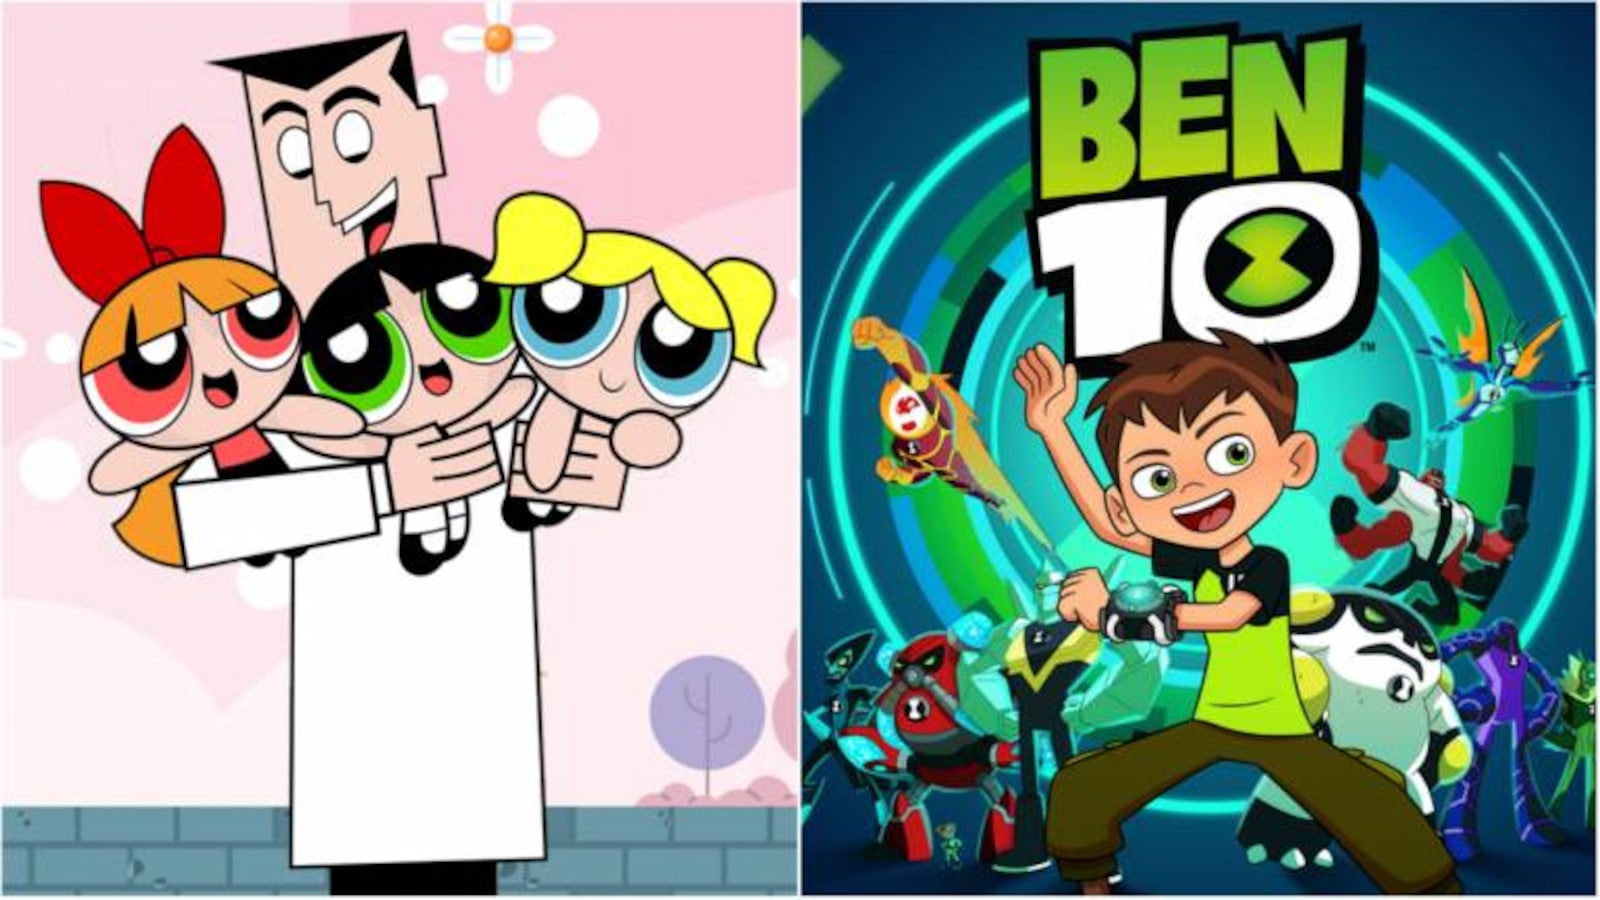 RIP Cartoon Network: A look at 5 shows that defined our childhood